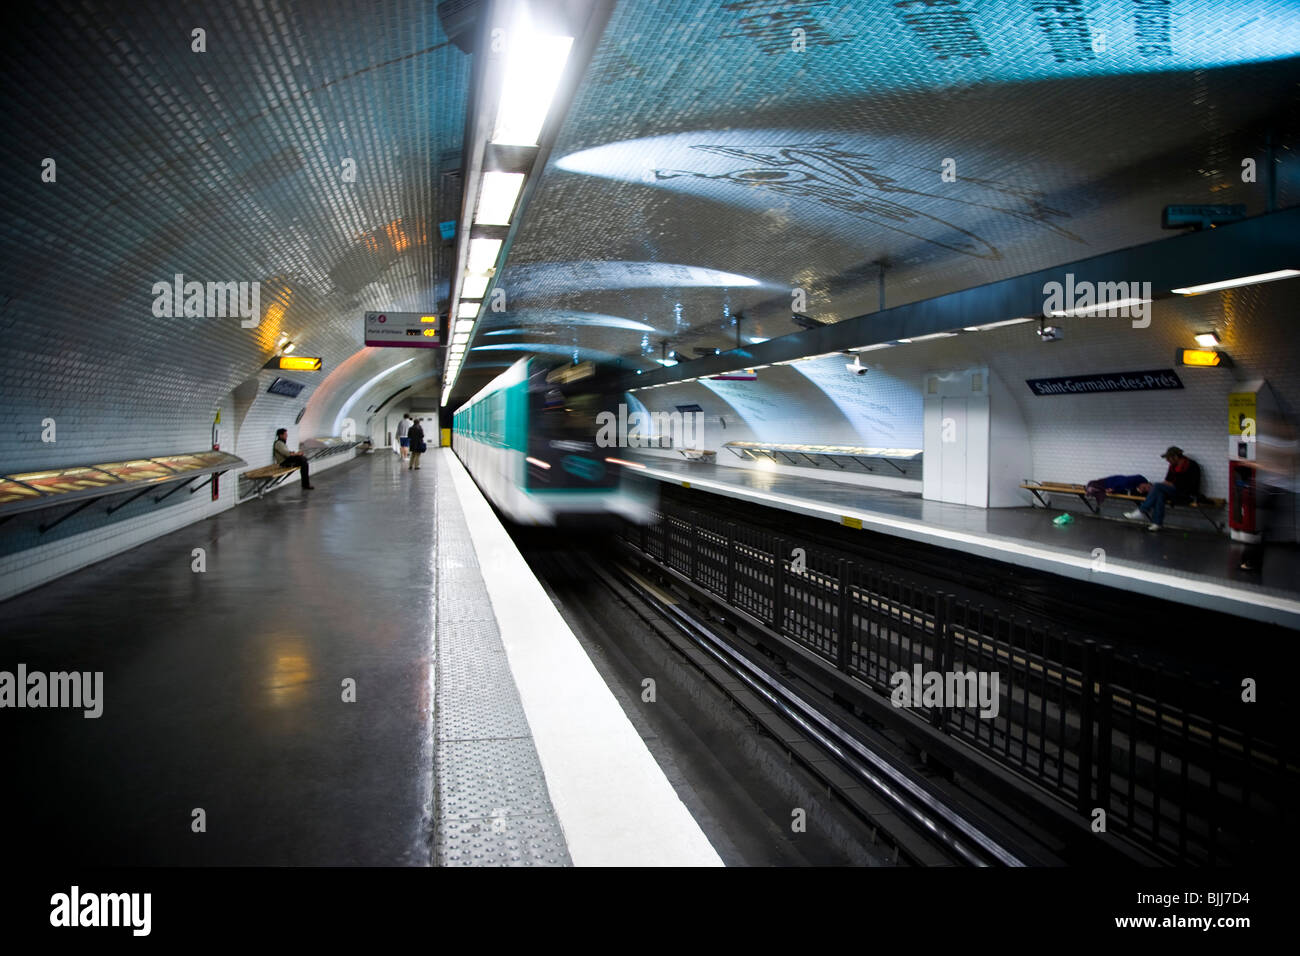 Subway platform with subway in motion Stock Photo